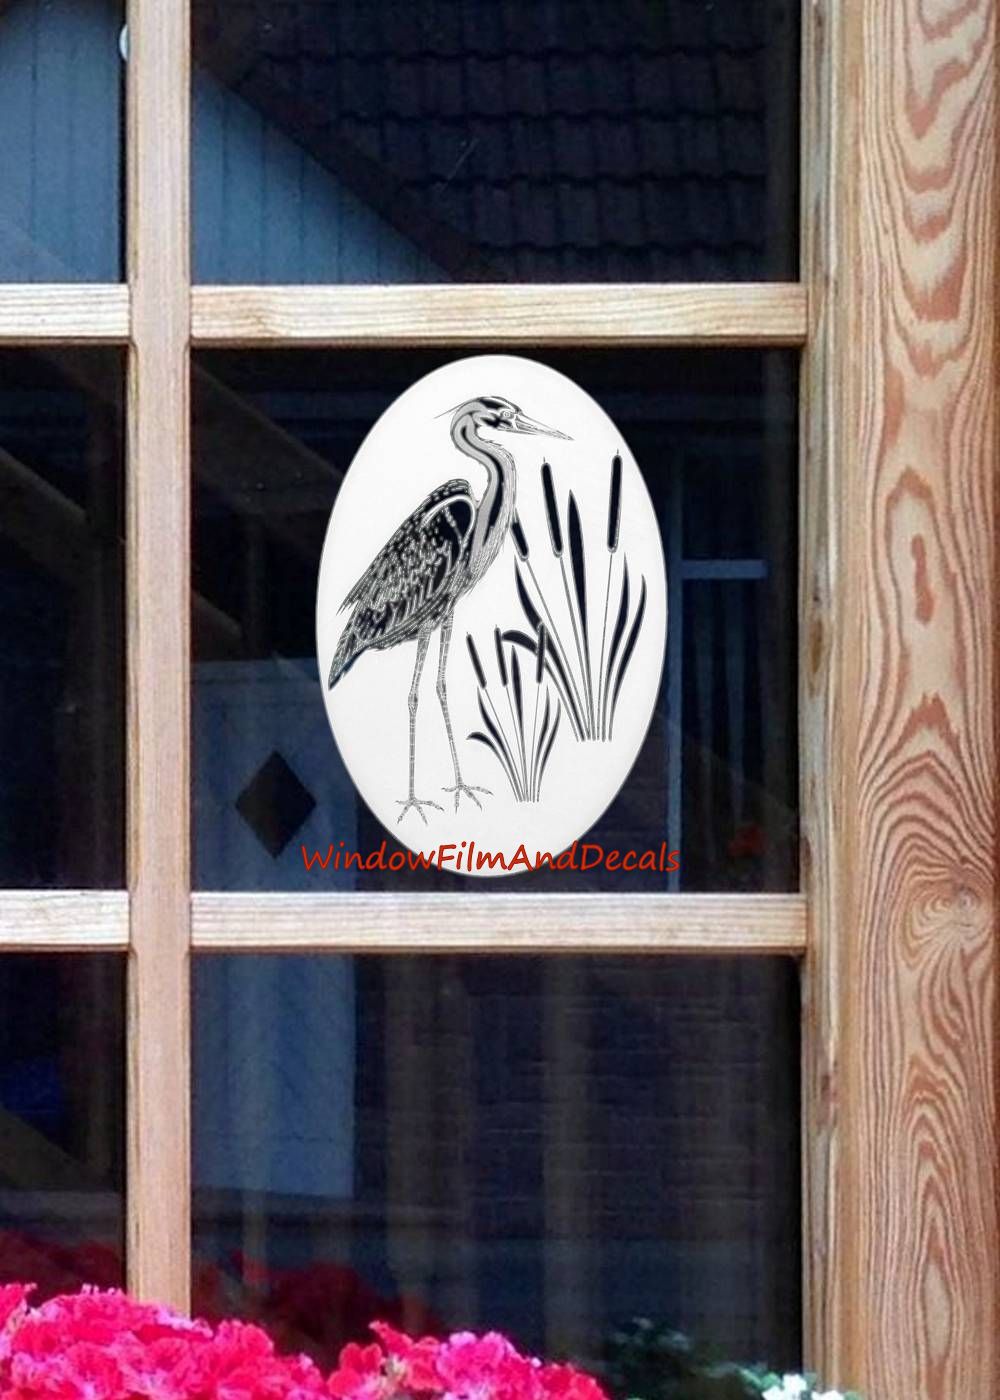 Egret & Cattails Left Oval Static Cling Window Decal - White w/Clear Design